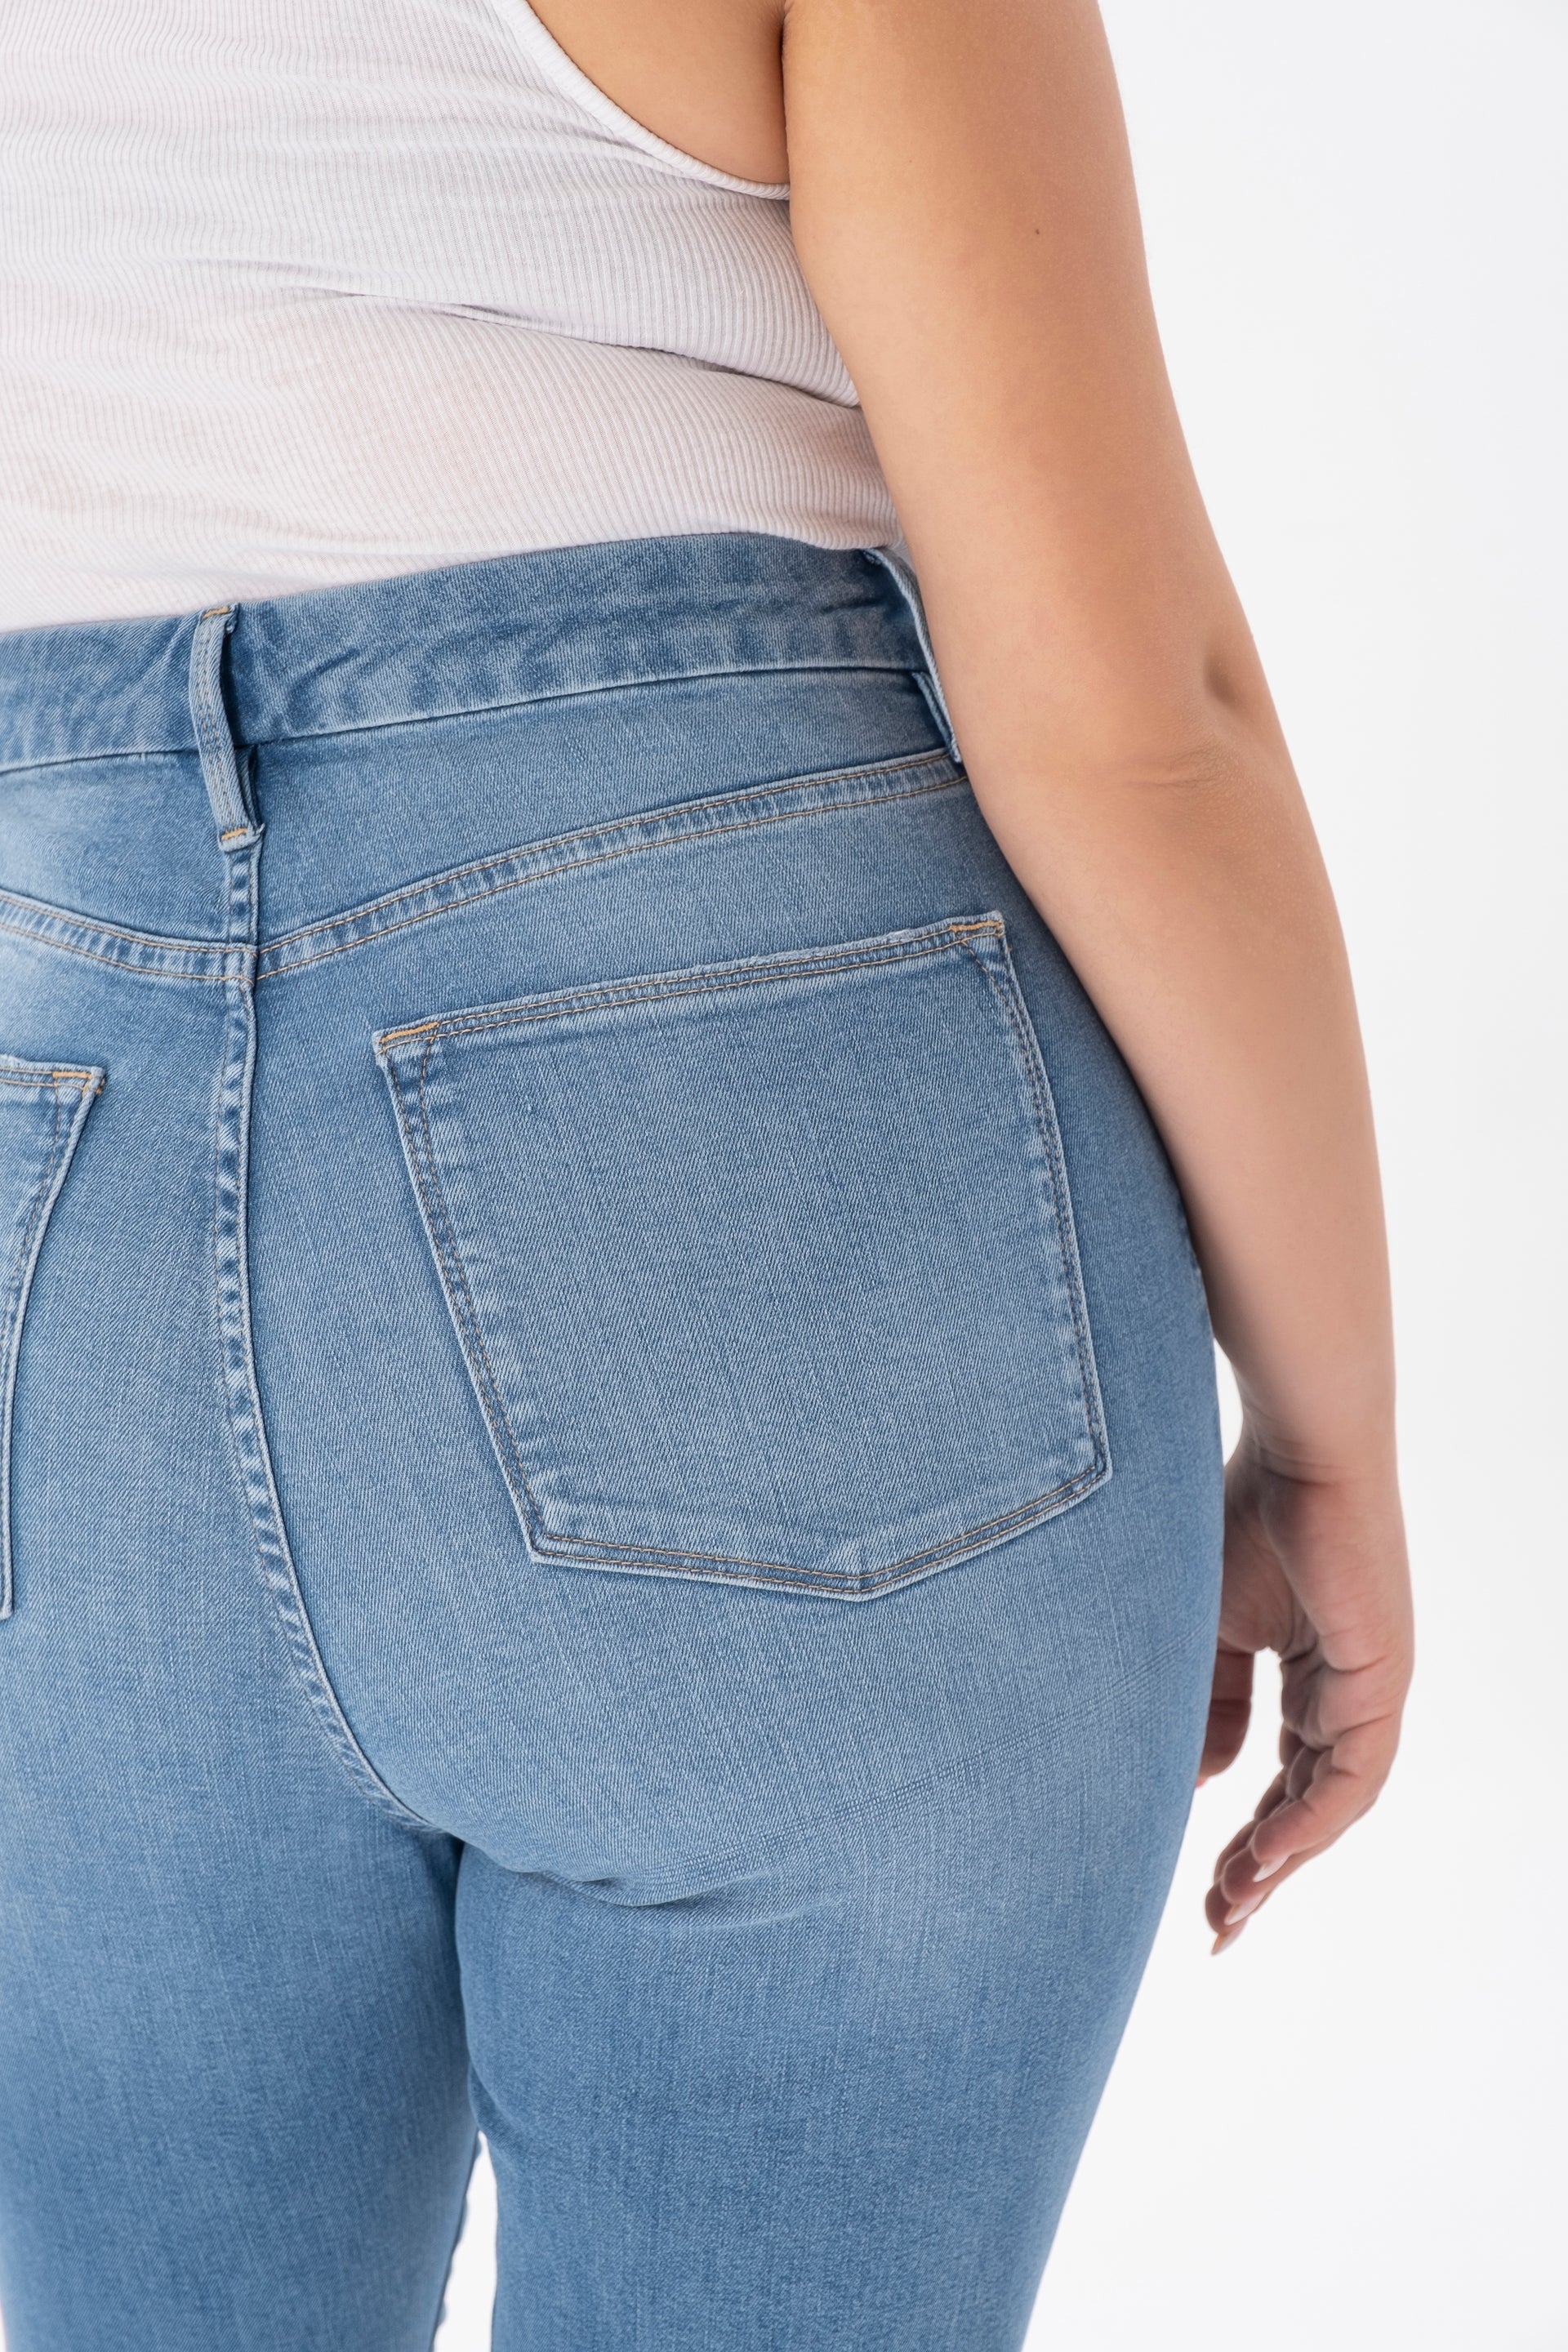 Ultra high waisted jeans for plus size women.